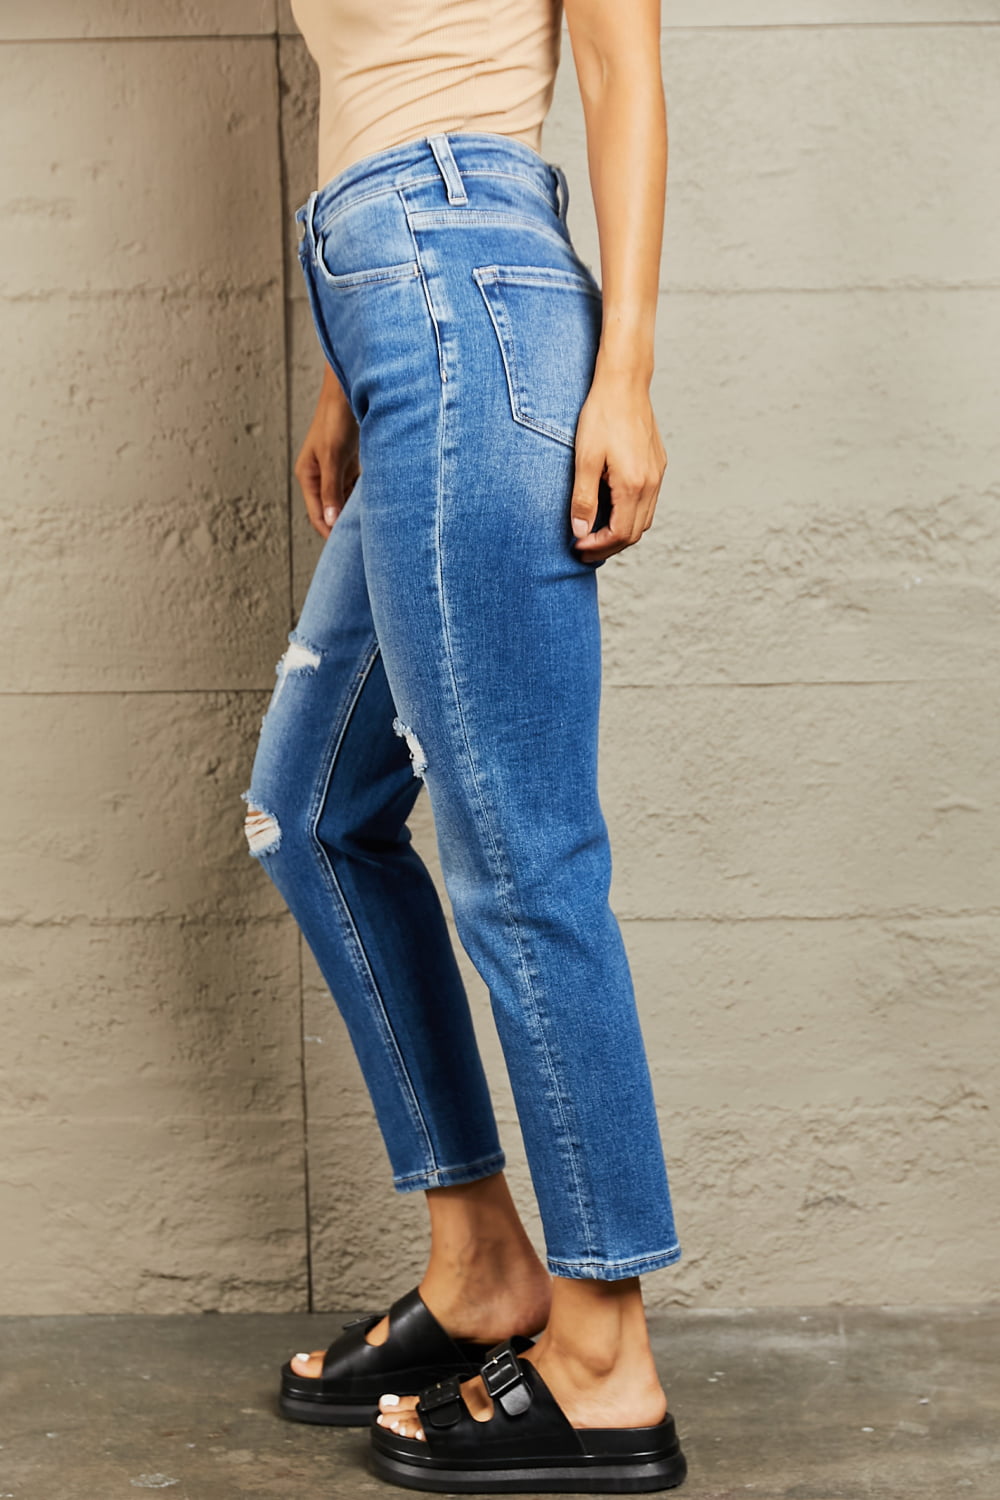 BAYEAS High Waisted Cropped Dad Jeans - nailedmoms